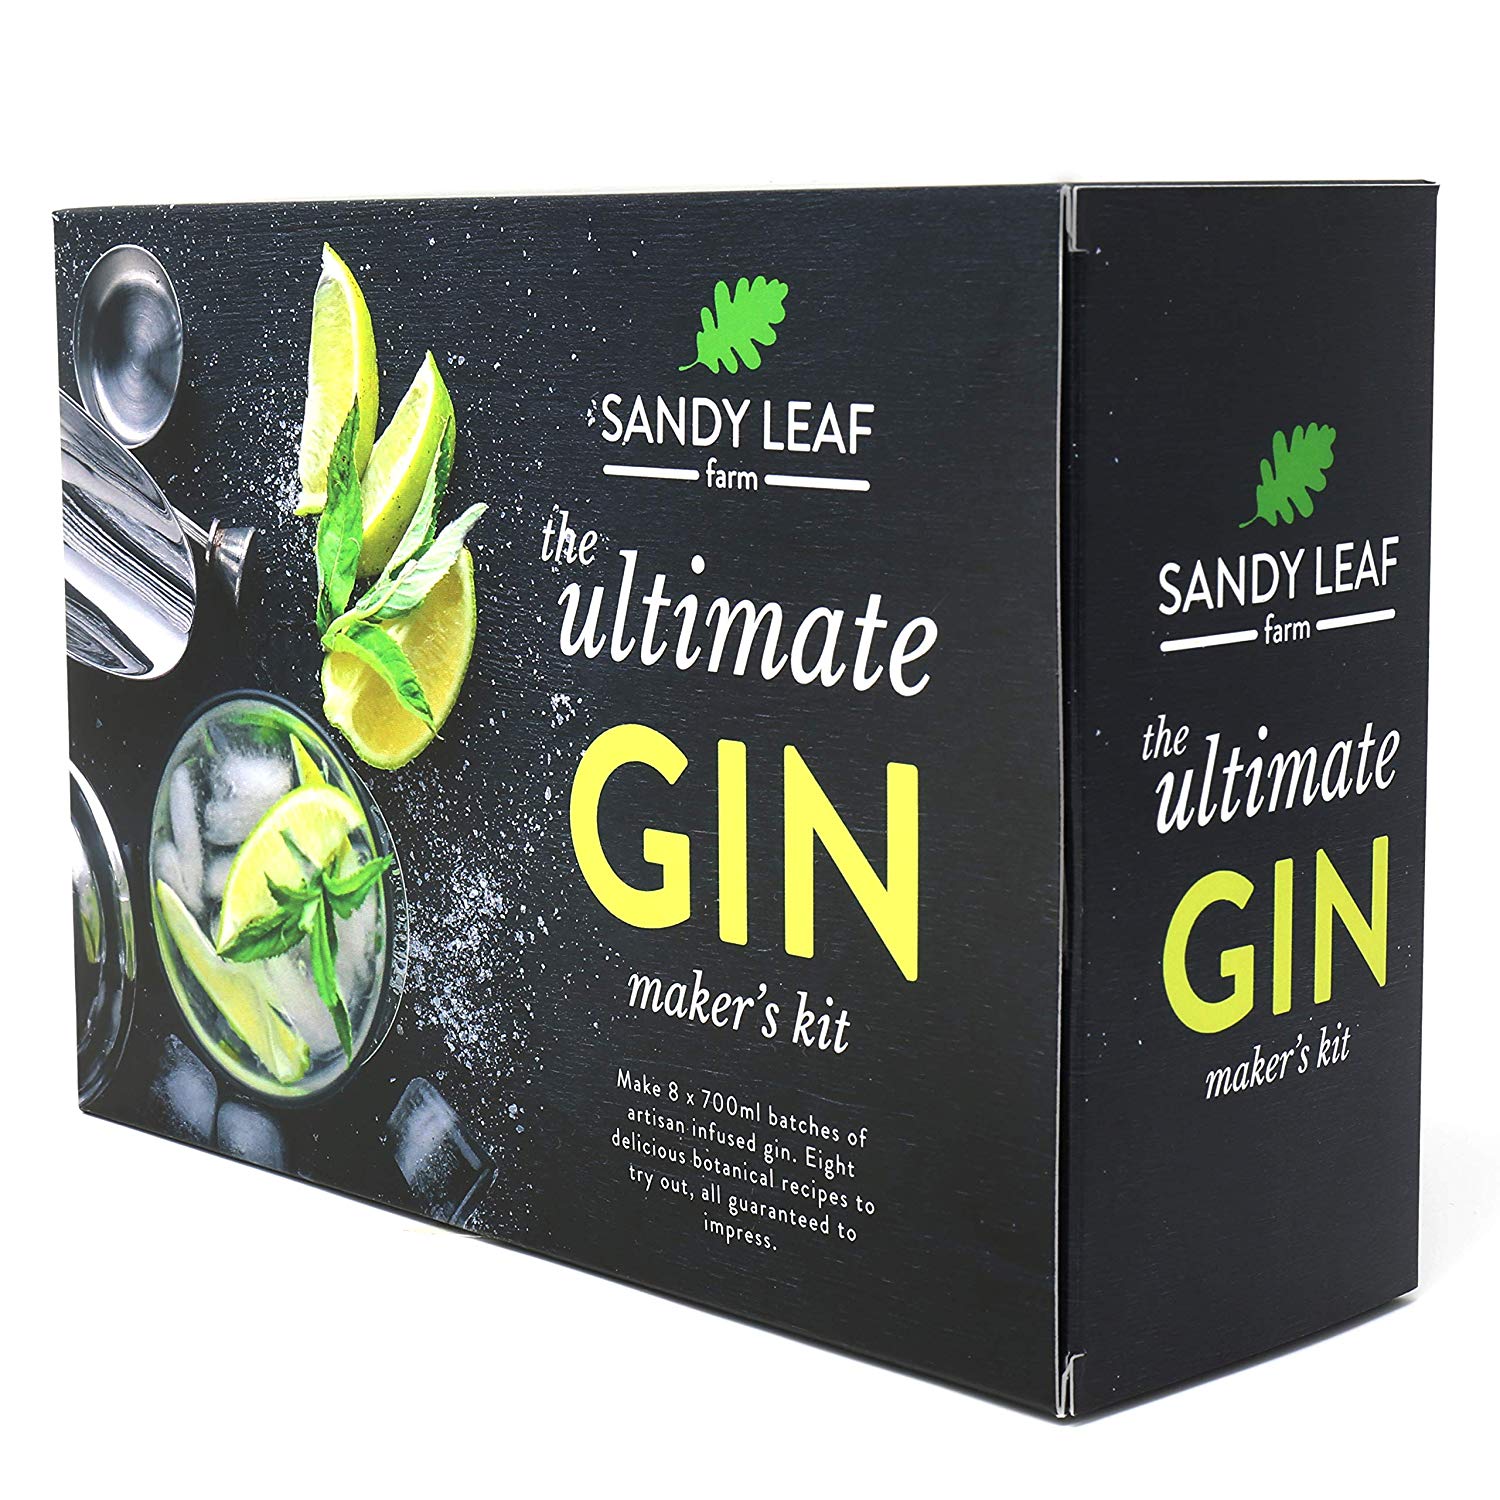 Win a Gin Making Kit from Sandy Leaf Farm